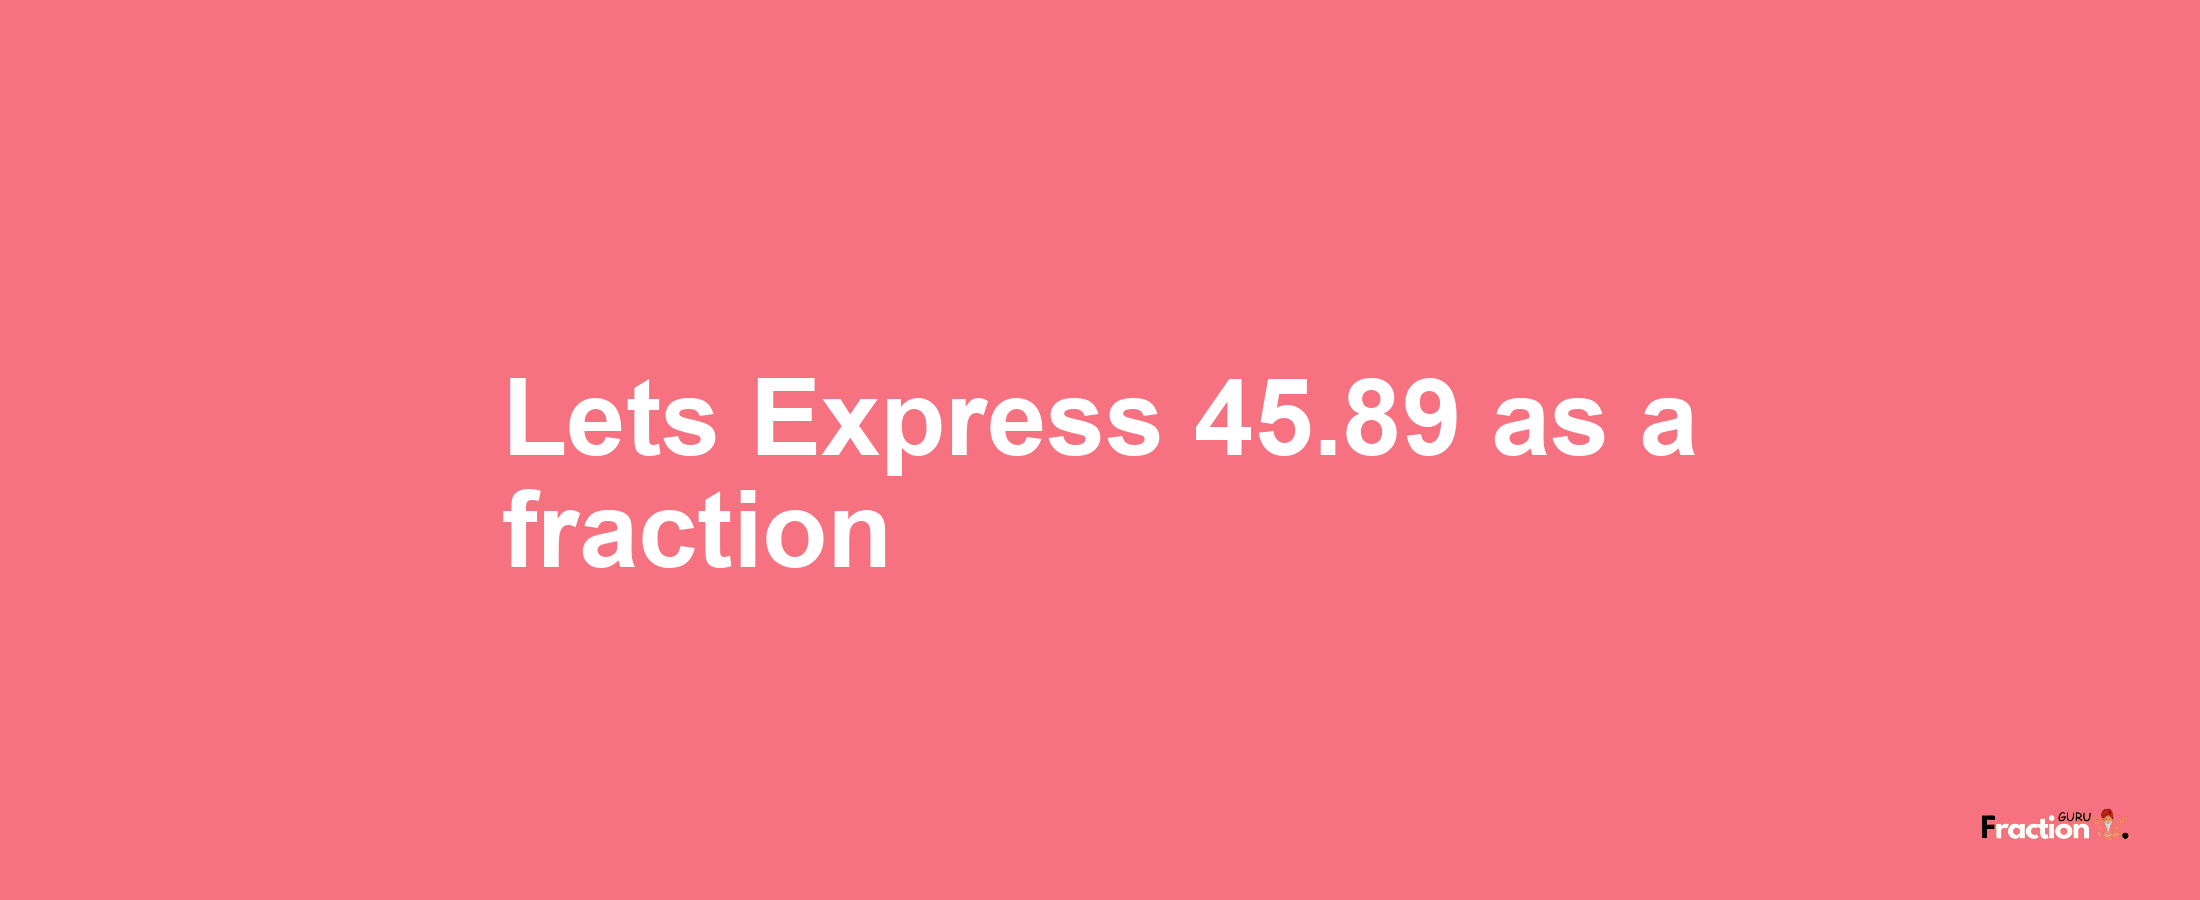 Lets Express 45.89 as afraction